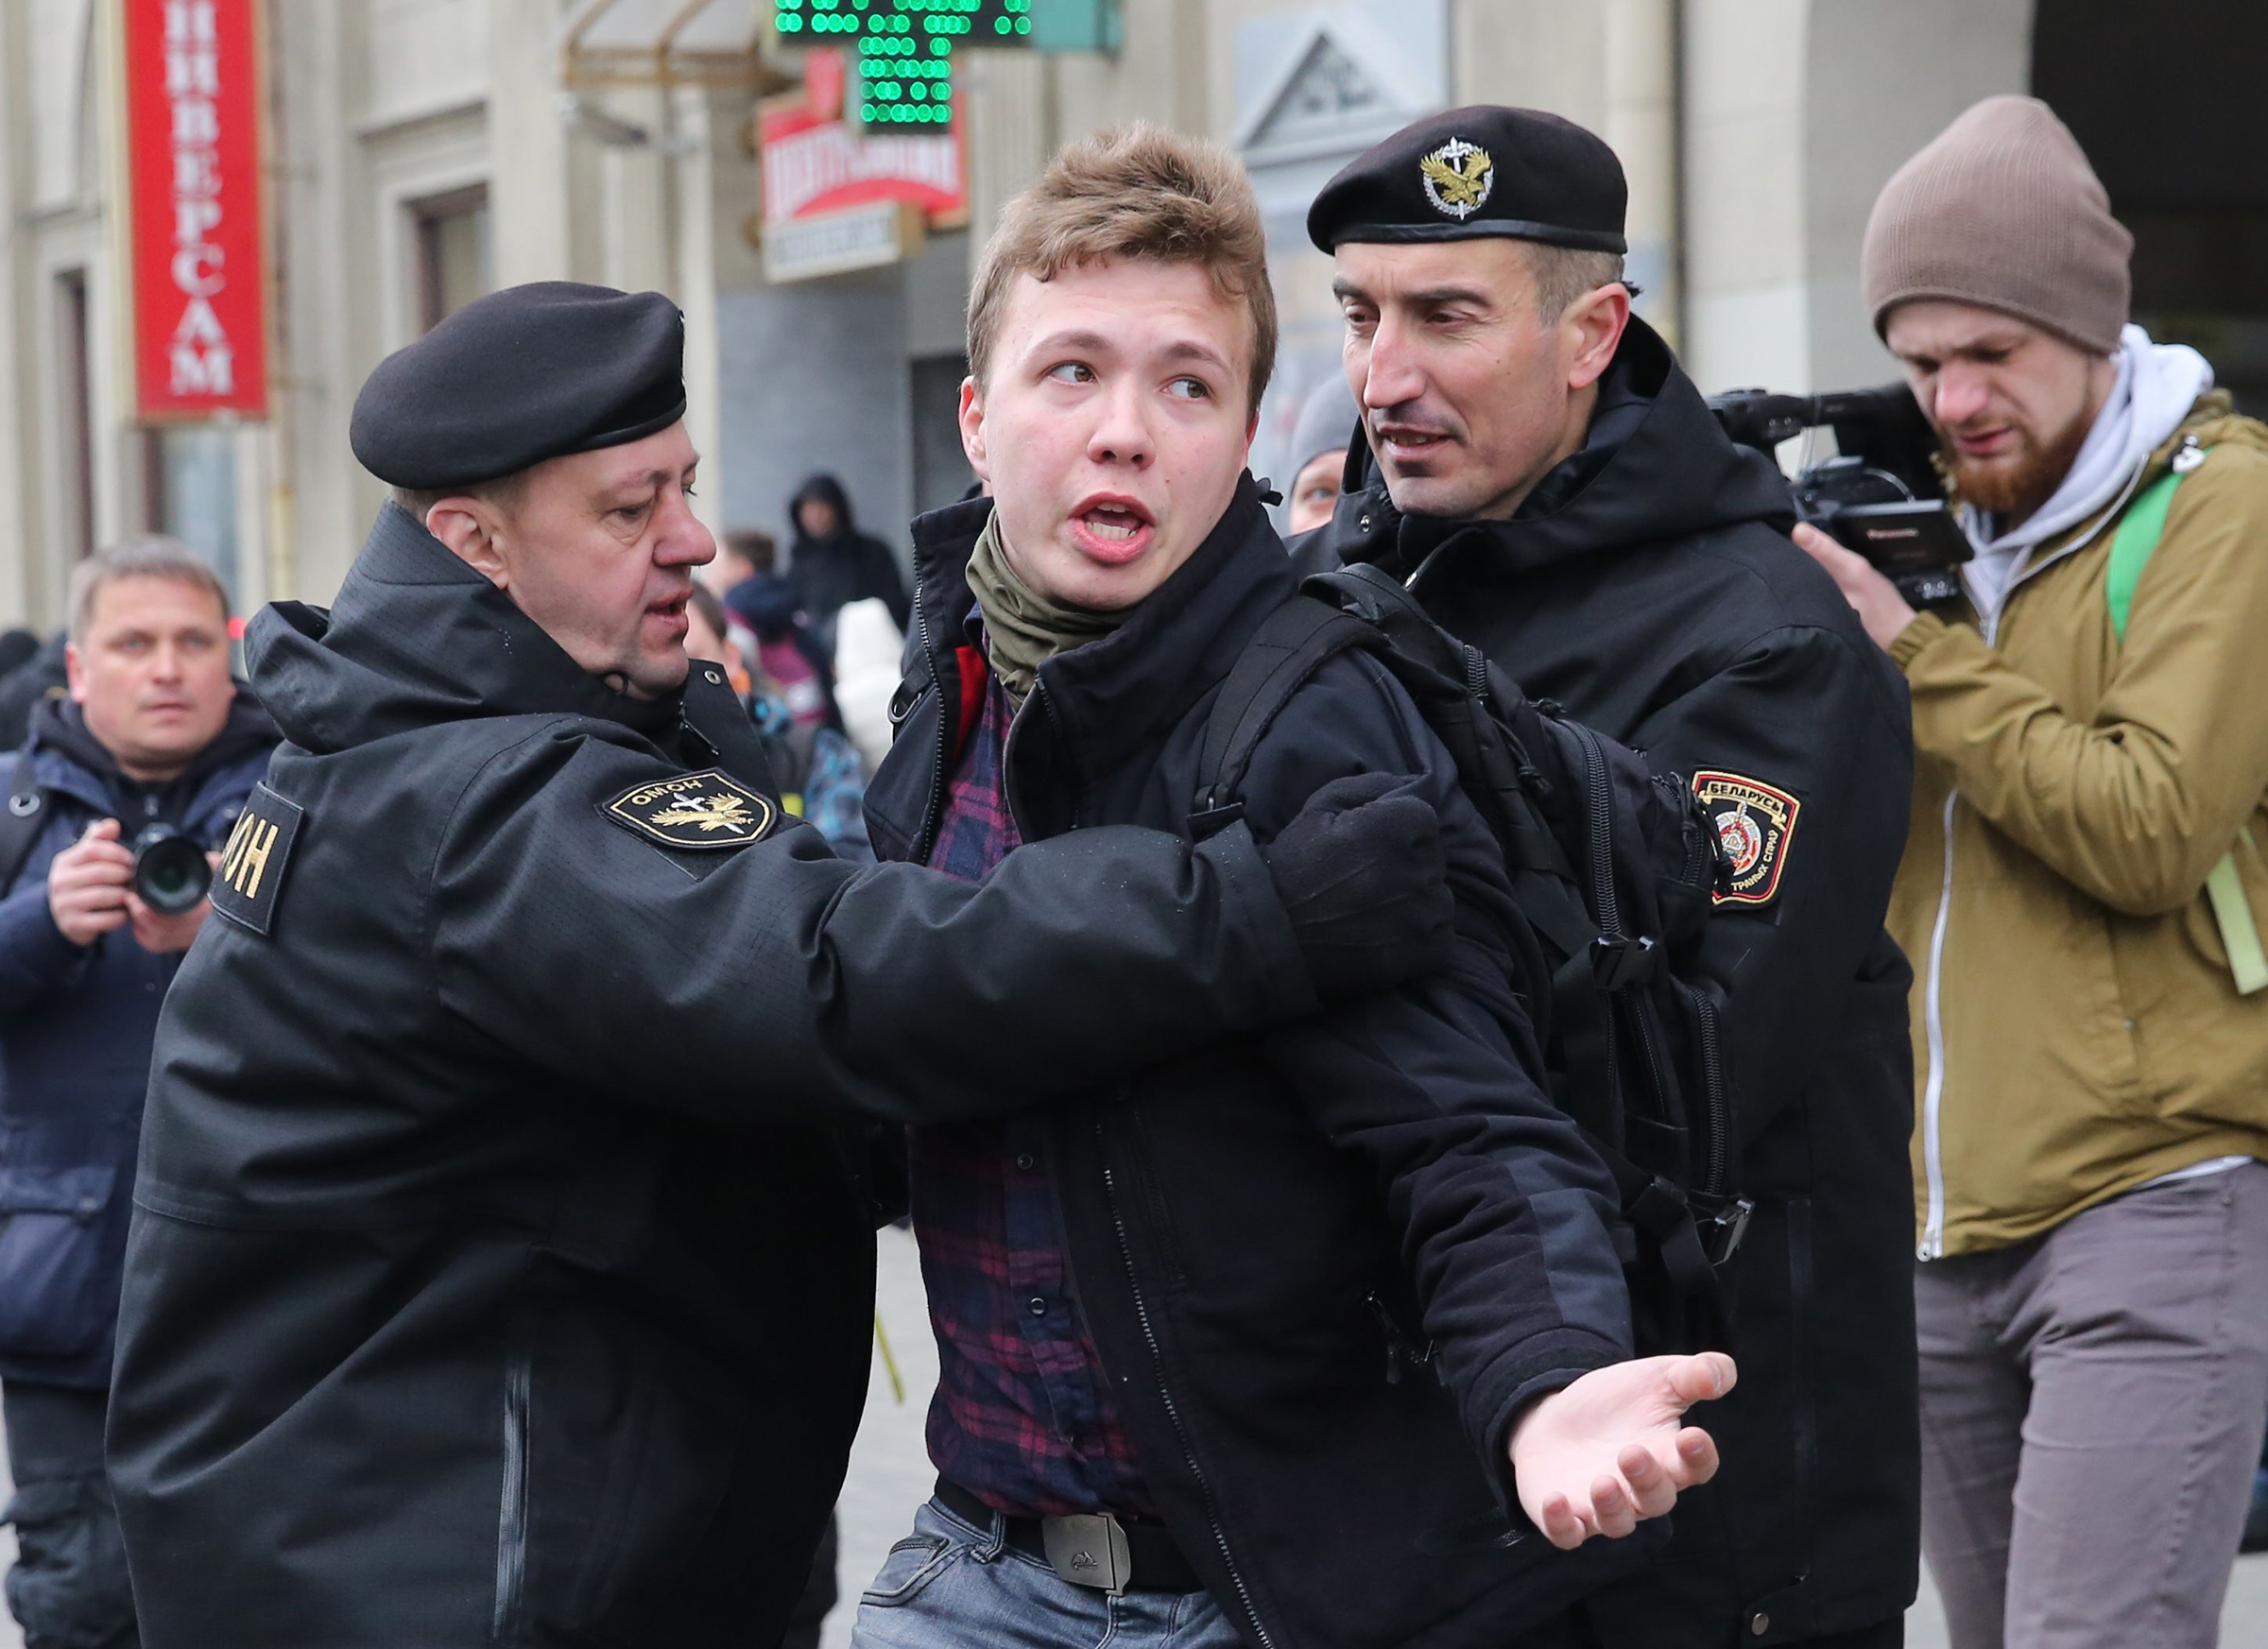 In March 2017, police officers detain journalist Roman Protasevich while attempting to cover a rally in Minsk. (Stringer/EPA-EFE/Shutterstock)